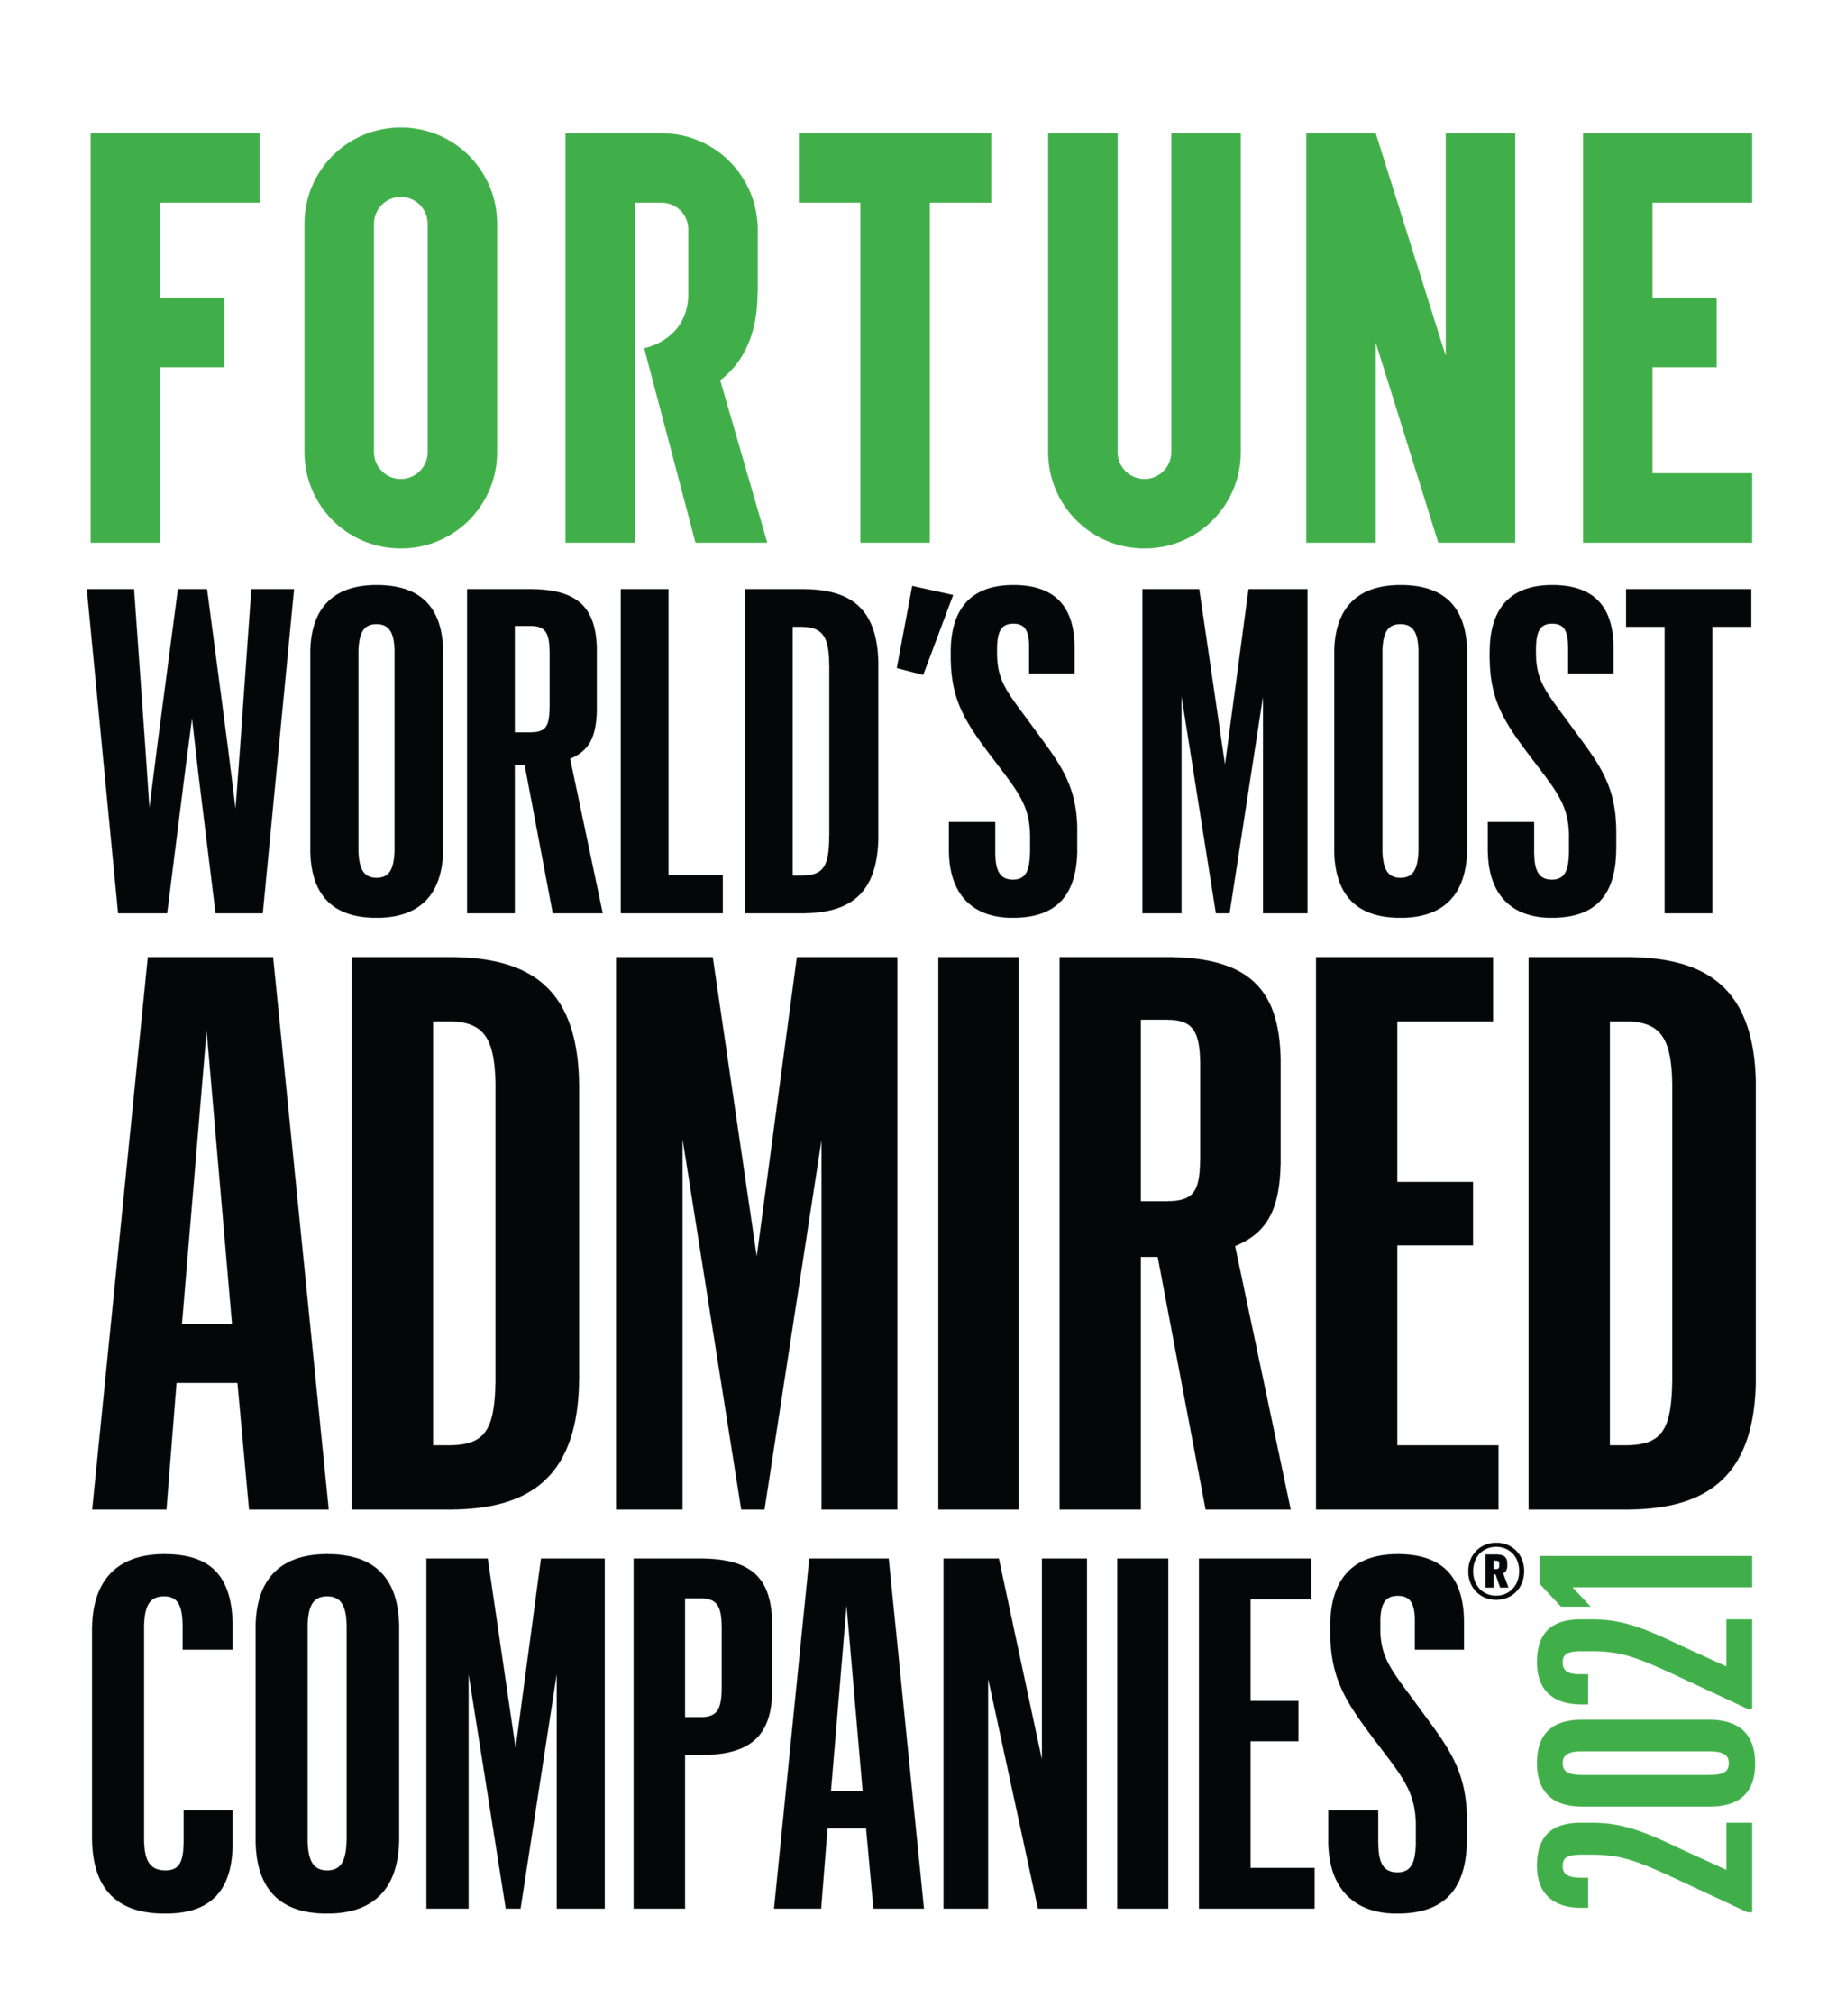 Fortune: World’s Most Admired Companies 2021